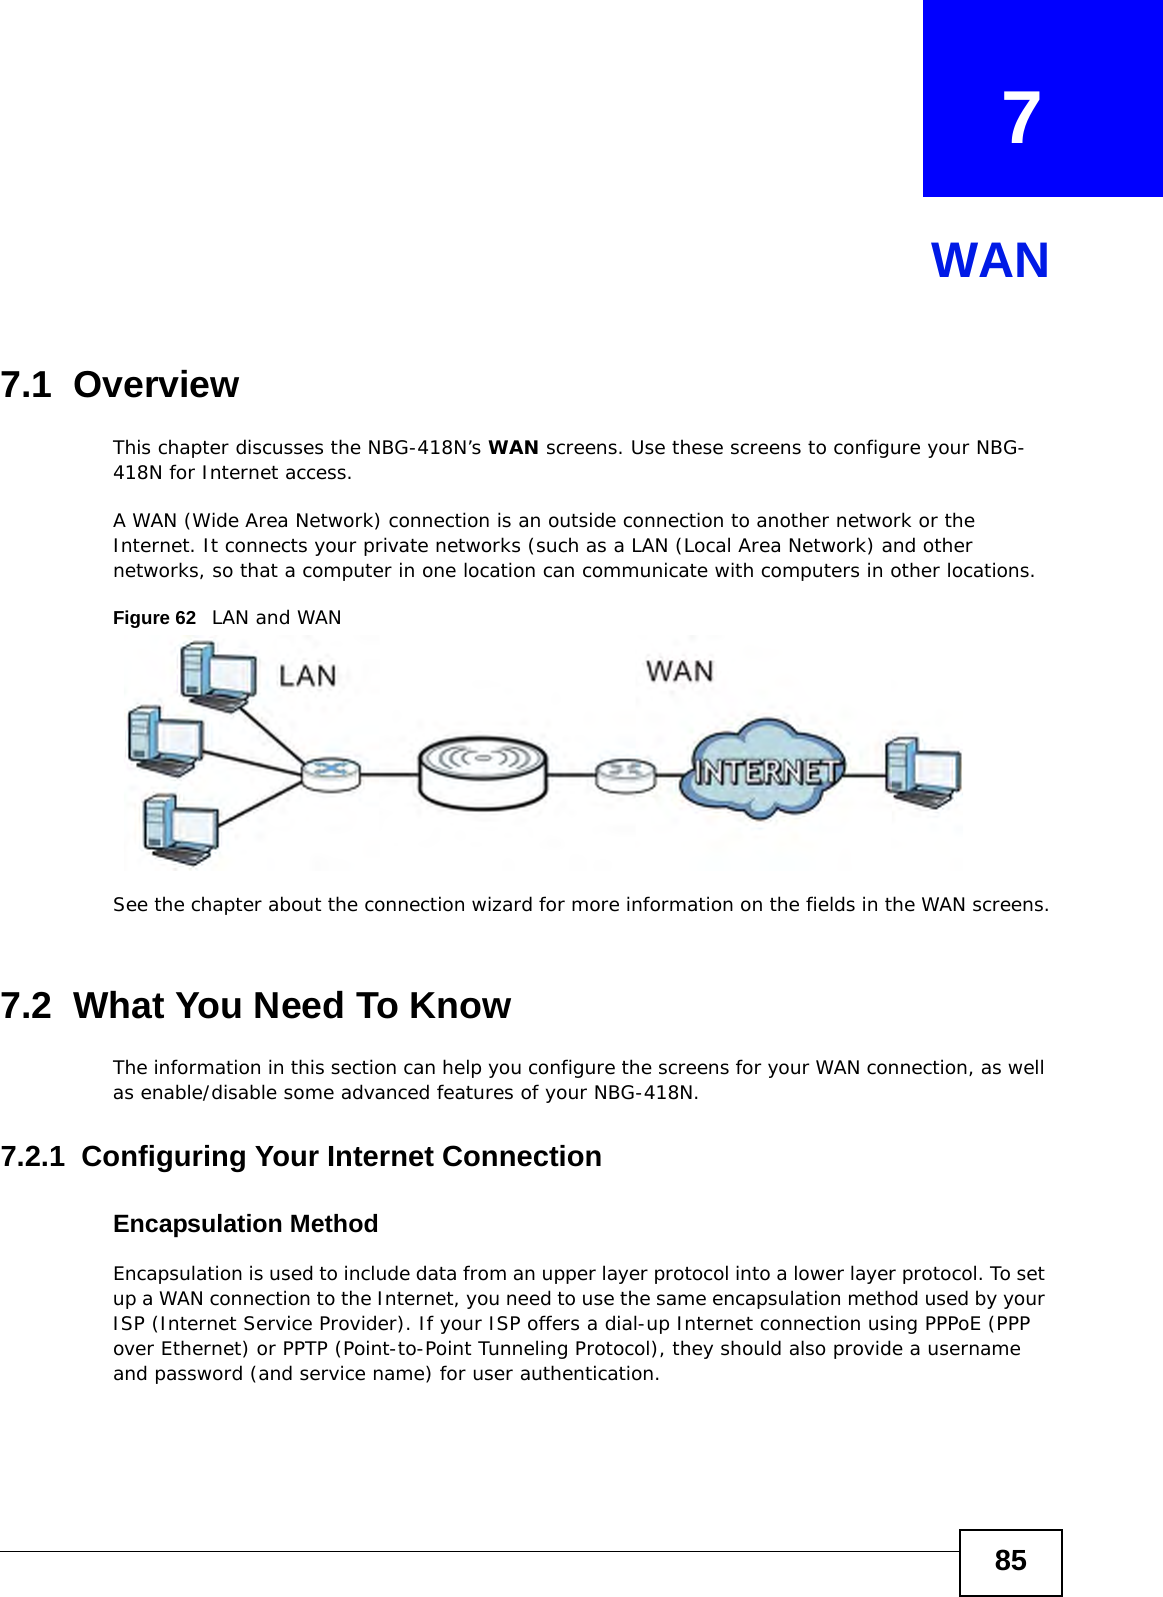 85CHAPTER   7WAN7.1  OverviewThis chapter discusses the NBG-418N’s WAN screens. Use these screens to configure your NBG-418N for Internet access.A WAN (Wide Area Network) connection is an outside connection to another network or the Internet. It connects your private networks (such as a LAN (Local Area Network) and other networks, so that a computer in one location can communicate with computers in other locations.Figure 62   LAN and WANSee the chapter about the connection wizard for more information on the fields in the WAN screens.7.2  What You Need To KnowThe information in this section can help you configure the screens for your WAN connection, as well as enable/disable some advanced features of your NBG-418N.7.2.1  Configuring Your Internet ConnectionEncapsulation MethodEncapsulation is used to include data from an upper layer protocol into a lower layer protocol. To set up a WAN connection to the Internet, you need to use the same encapsulation method used by your ISP (Internet Service Provider). If your ISP offers a dial-up Internet connection using PPPoE (PPP over Ethernet) or PPTP (Point-to-Point Tunneling Protocol), they should also provide a username and password (and service name) for user authentication.